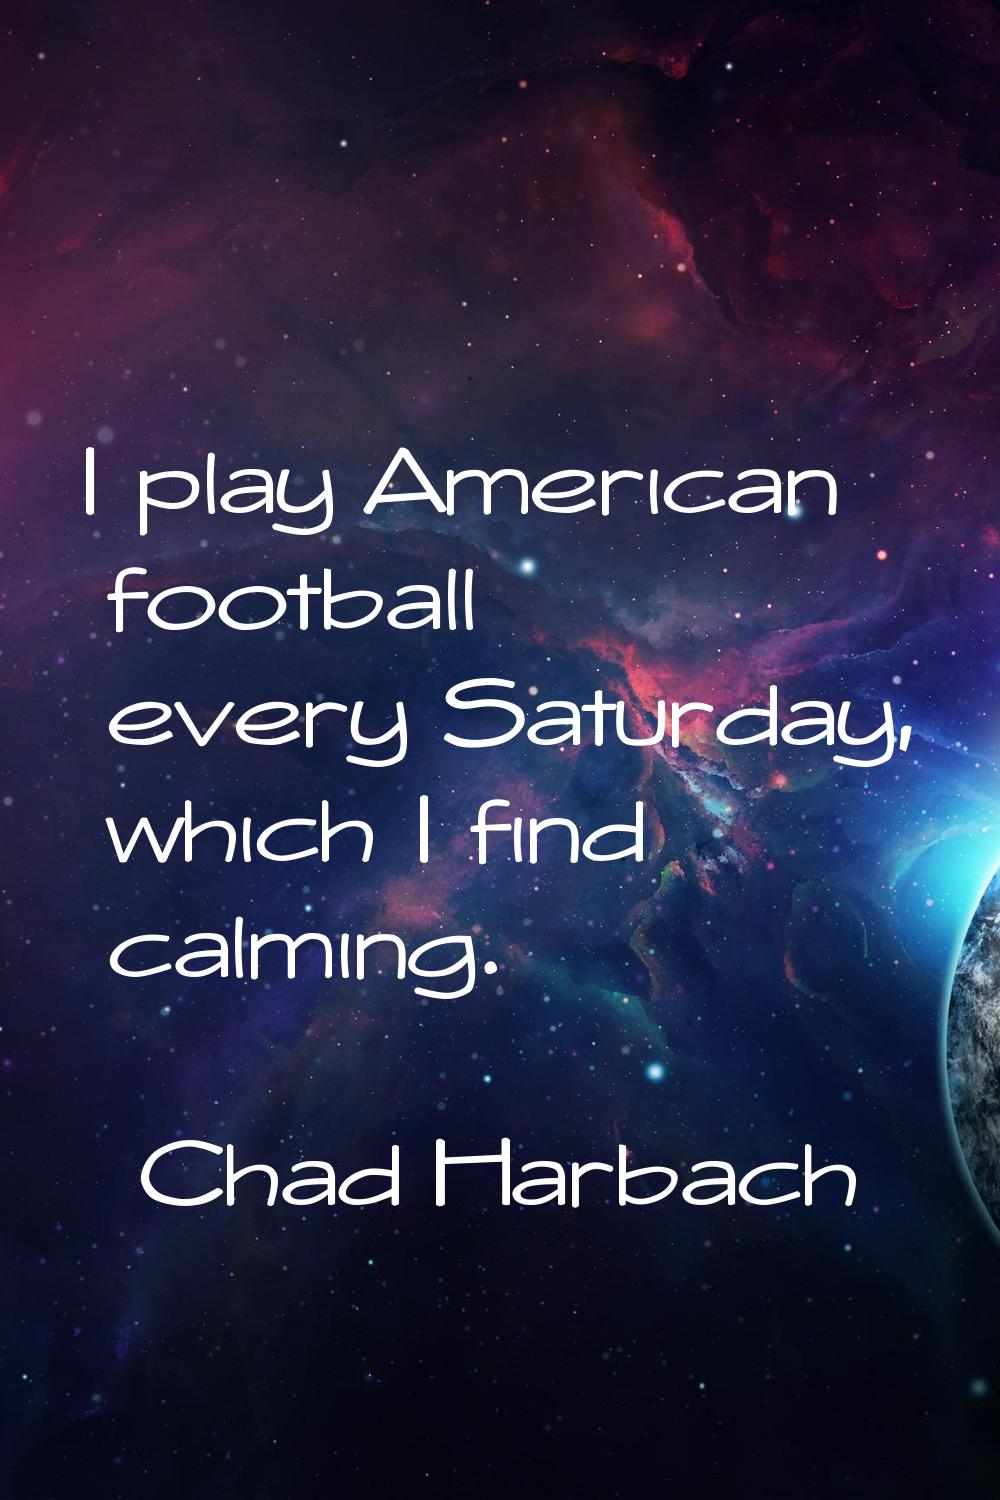 I play American football every Saturday, which I find calming.